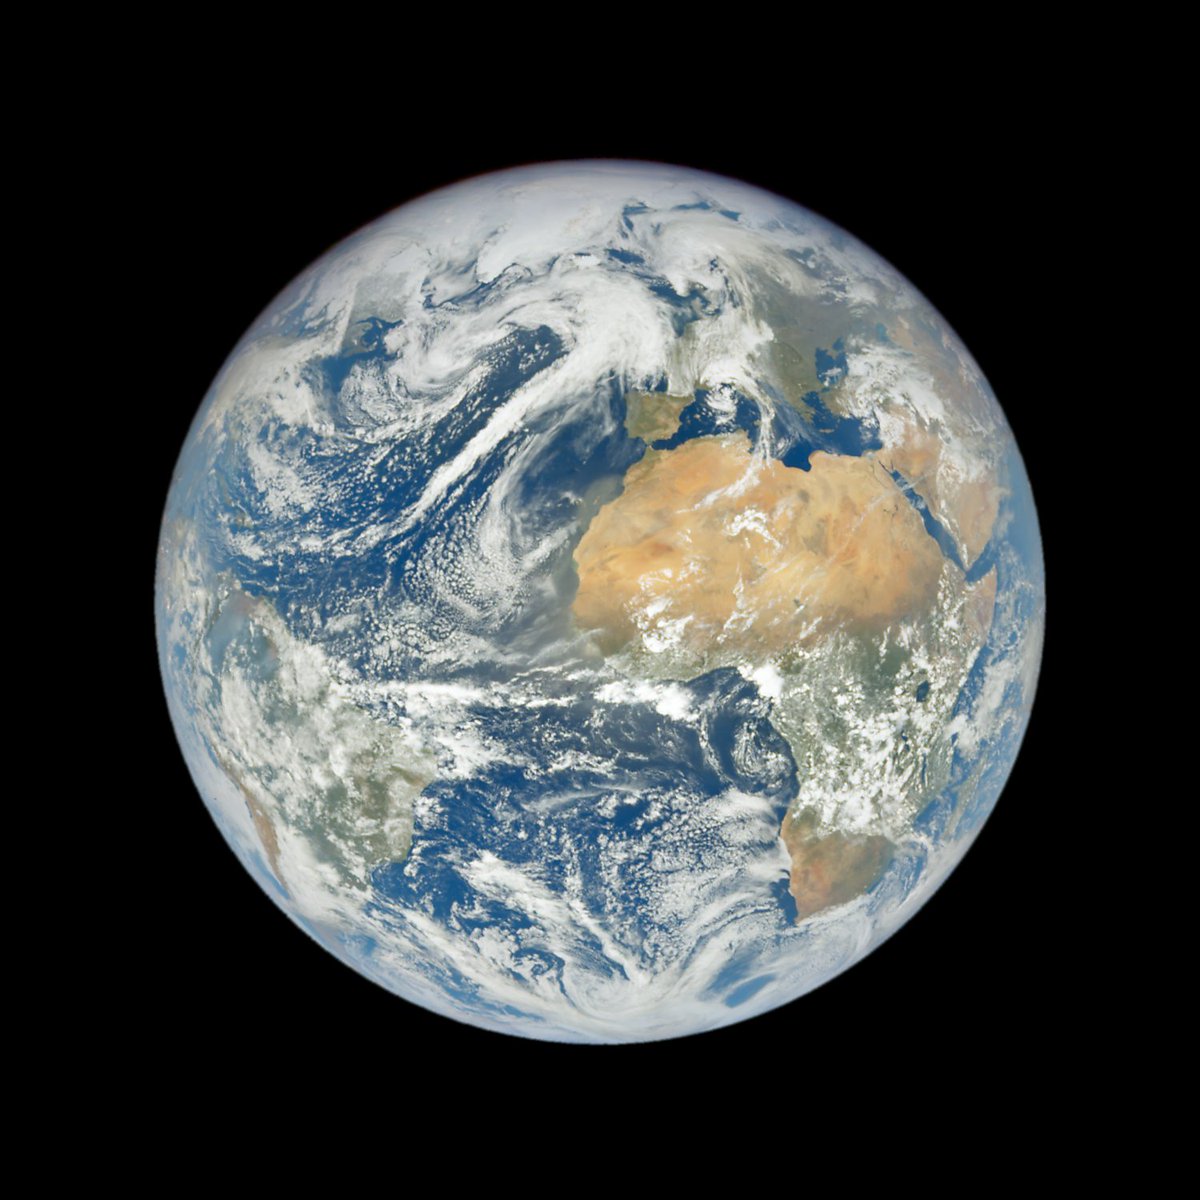 12:49 on Wednesday April 10th, over Africa